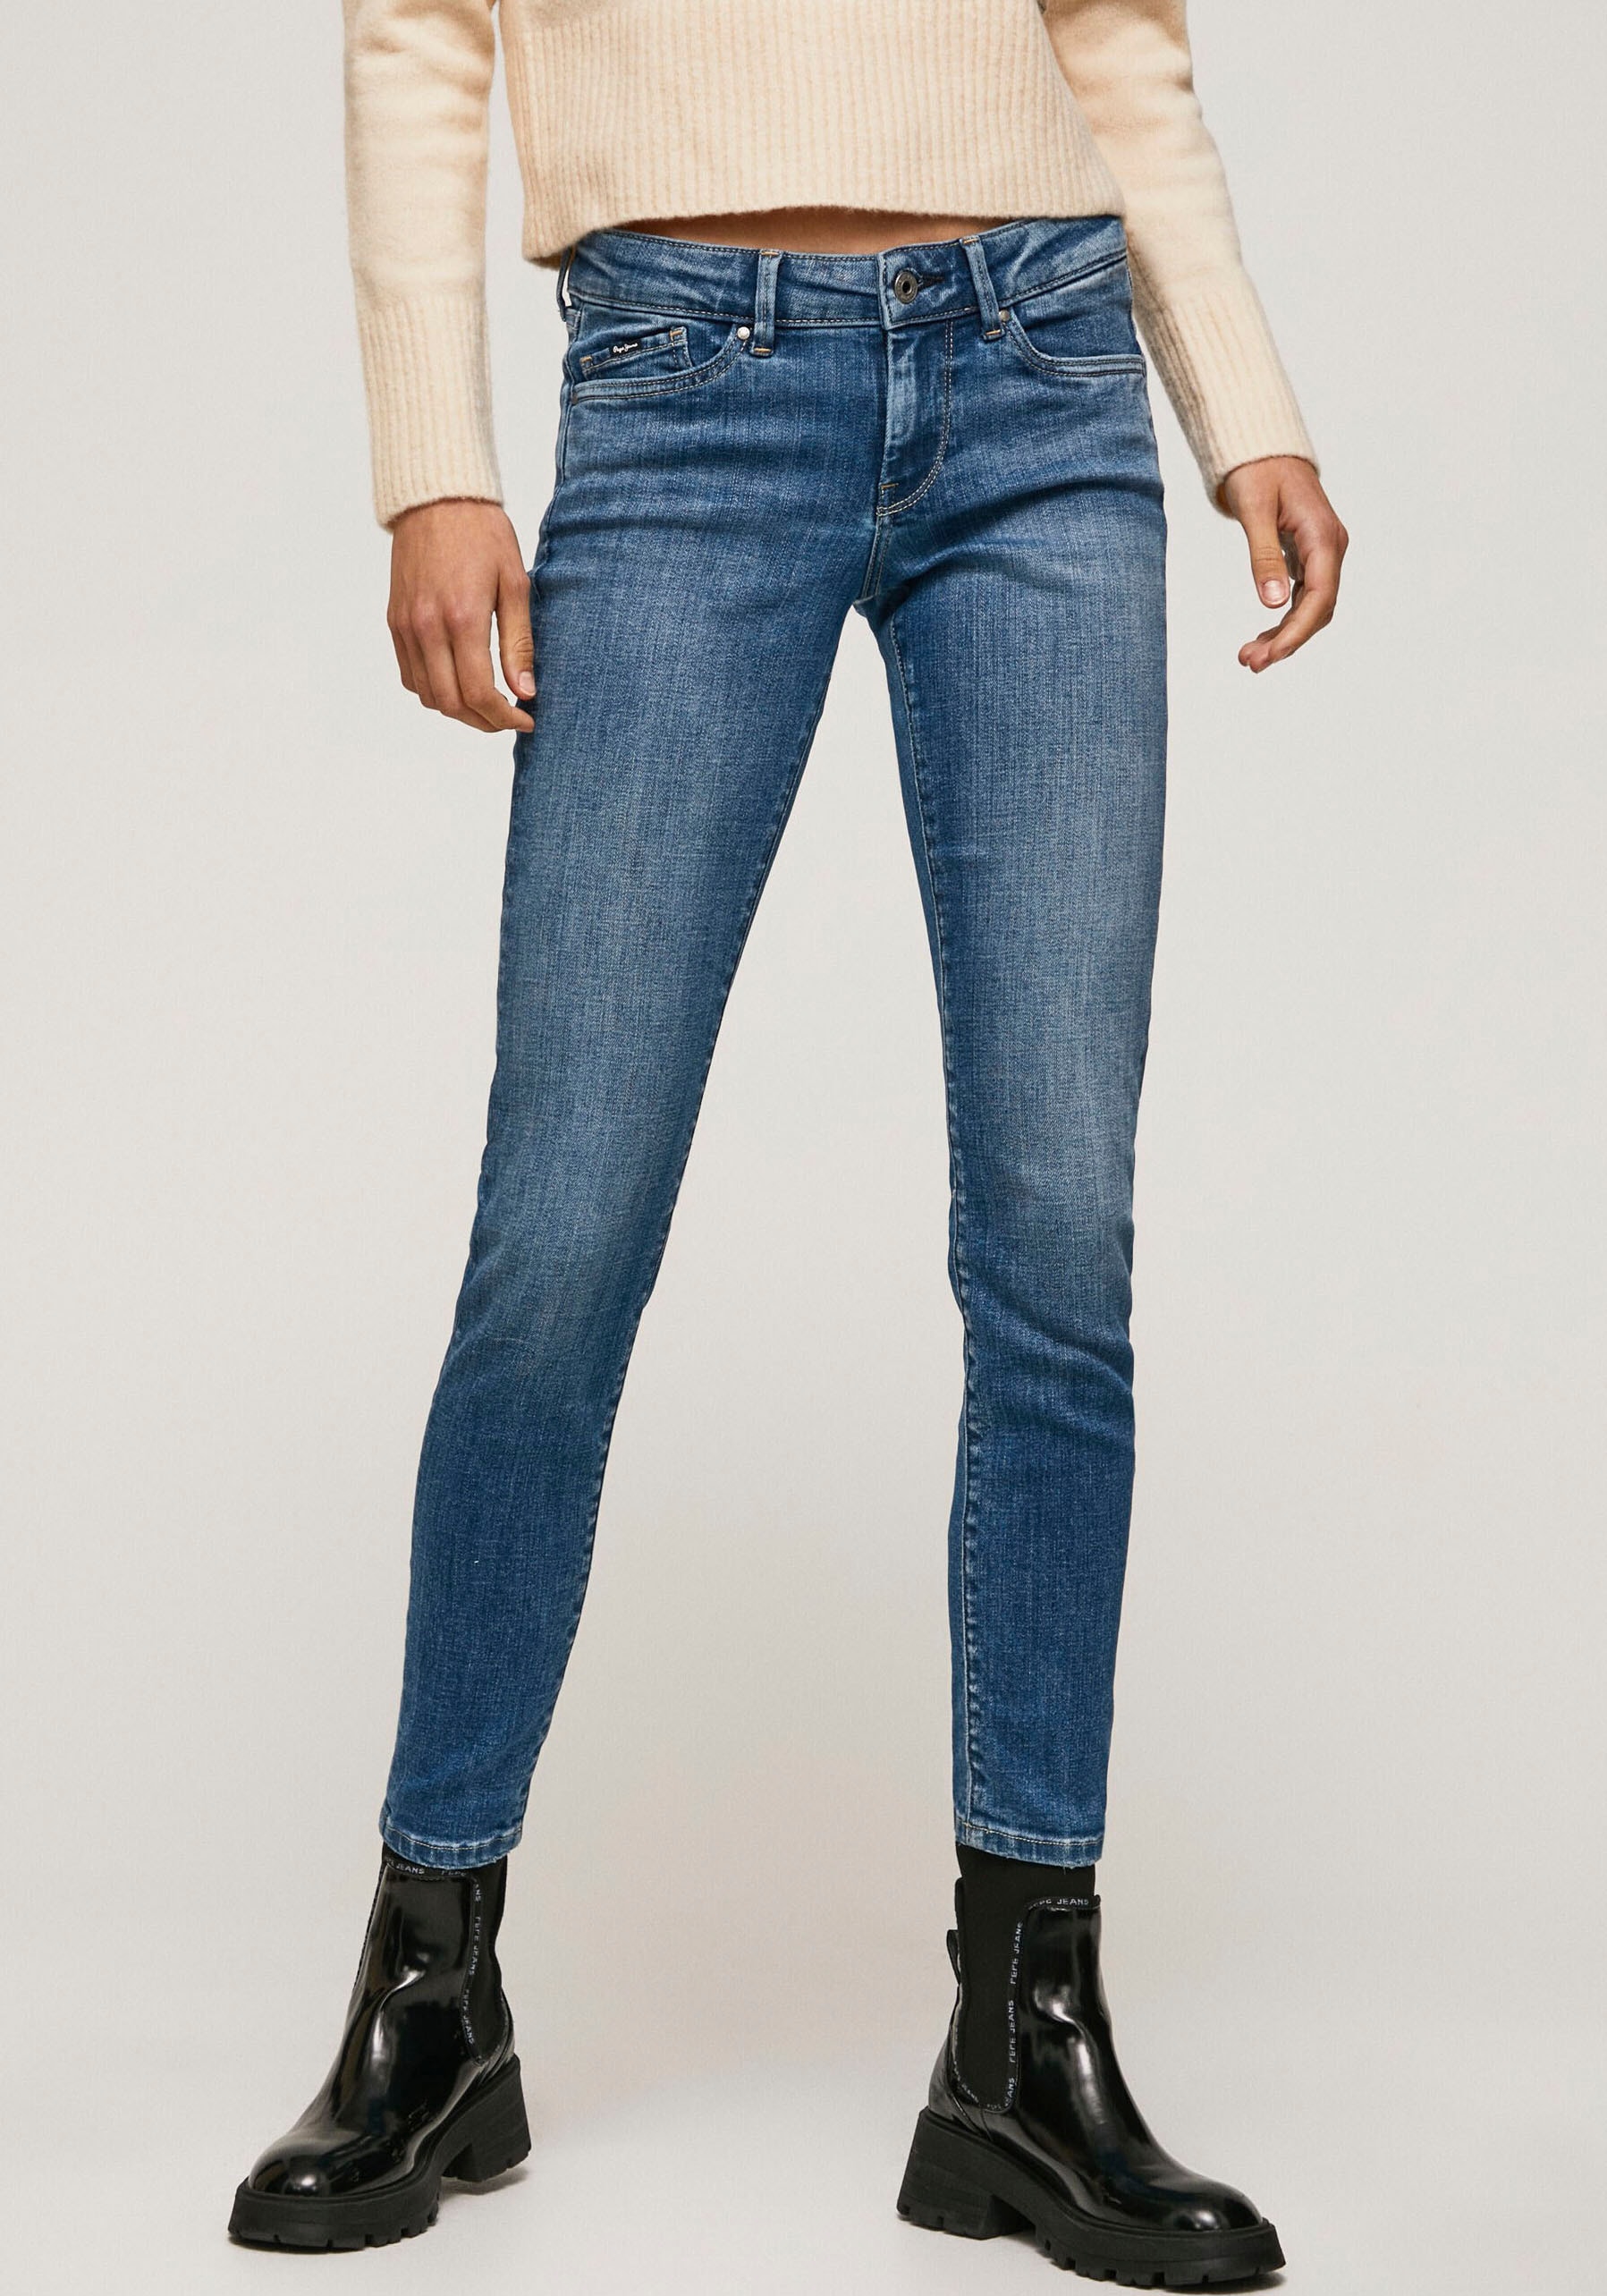 Pepe Jeans Skinny-fit-Jeans »PIXIE« von Pepe Jeans